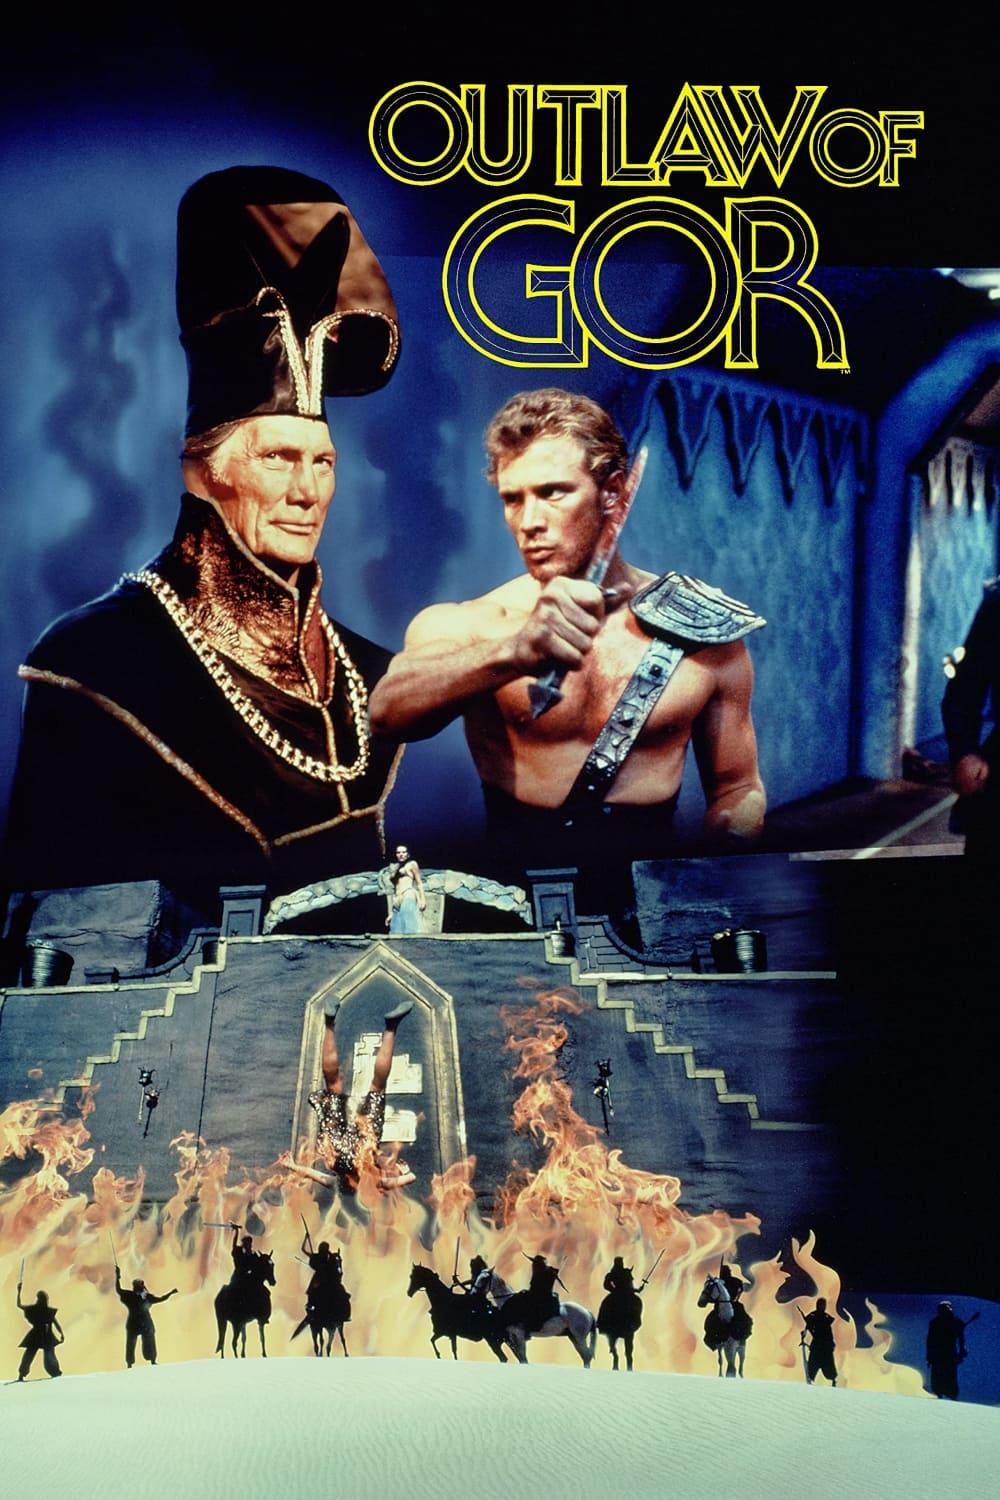 Outlaw of Gor poster